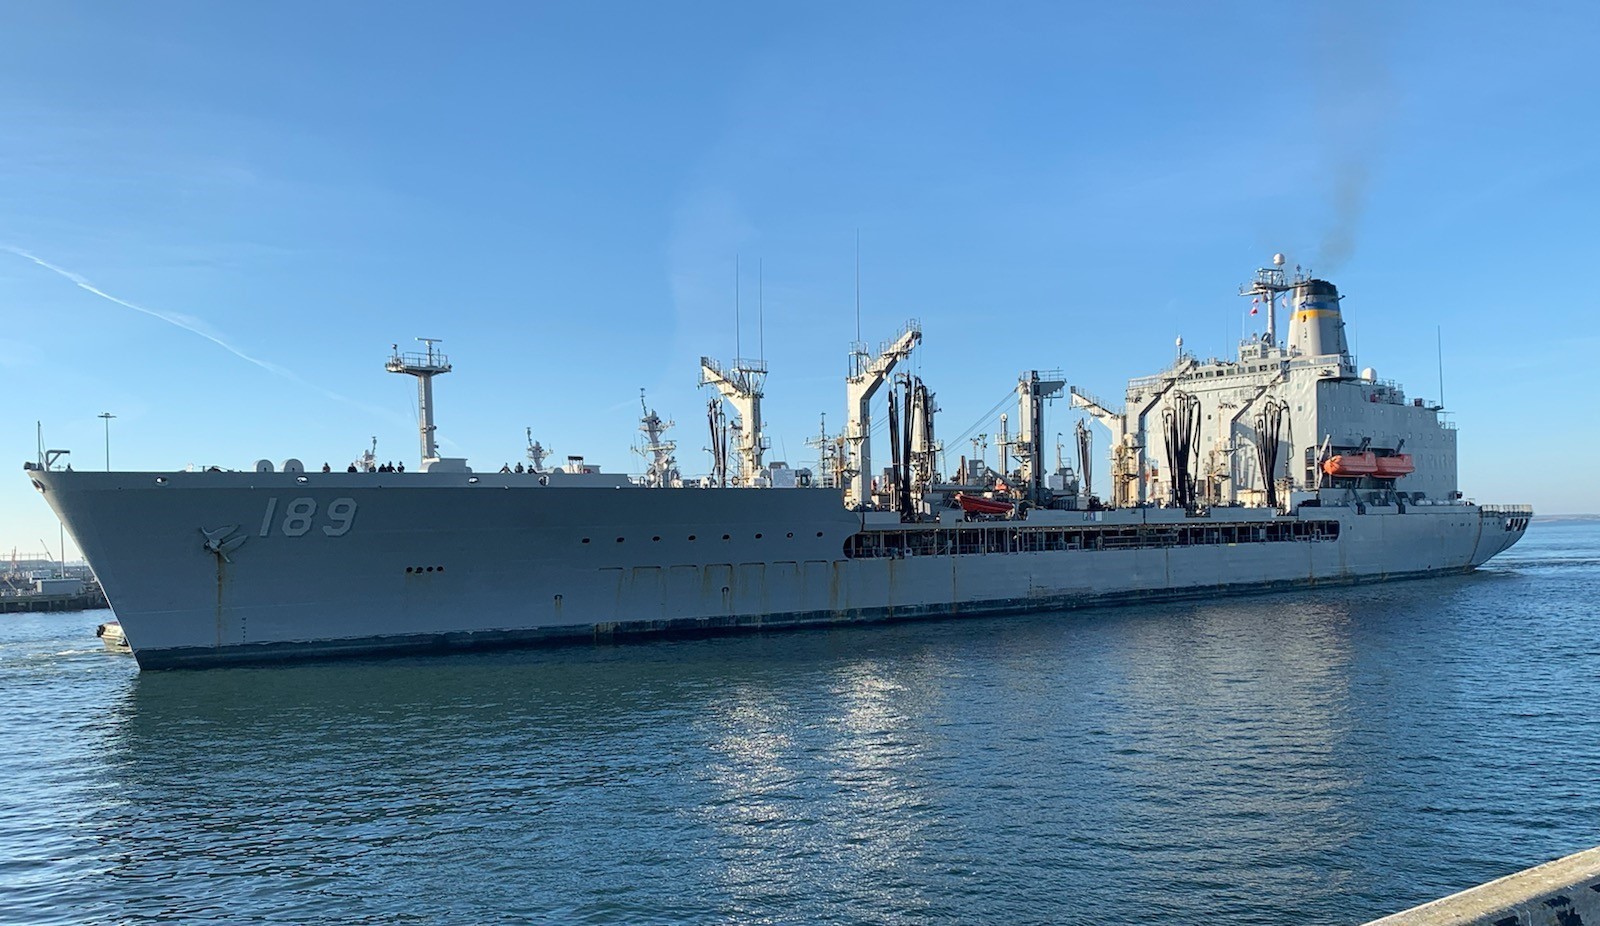 USNS John Lenthall (T-AO 189) returns to Naval Station Norfolk December 16, after completing a five-month deployment overseas.